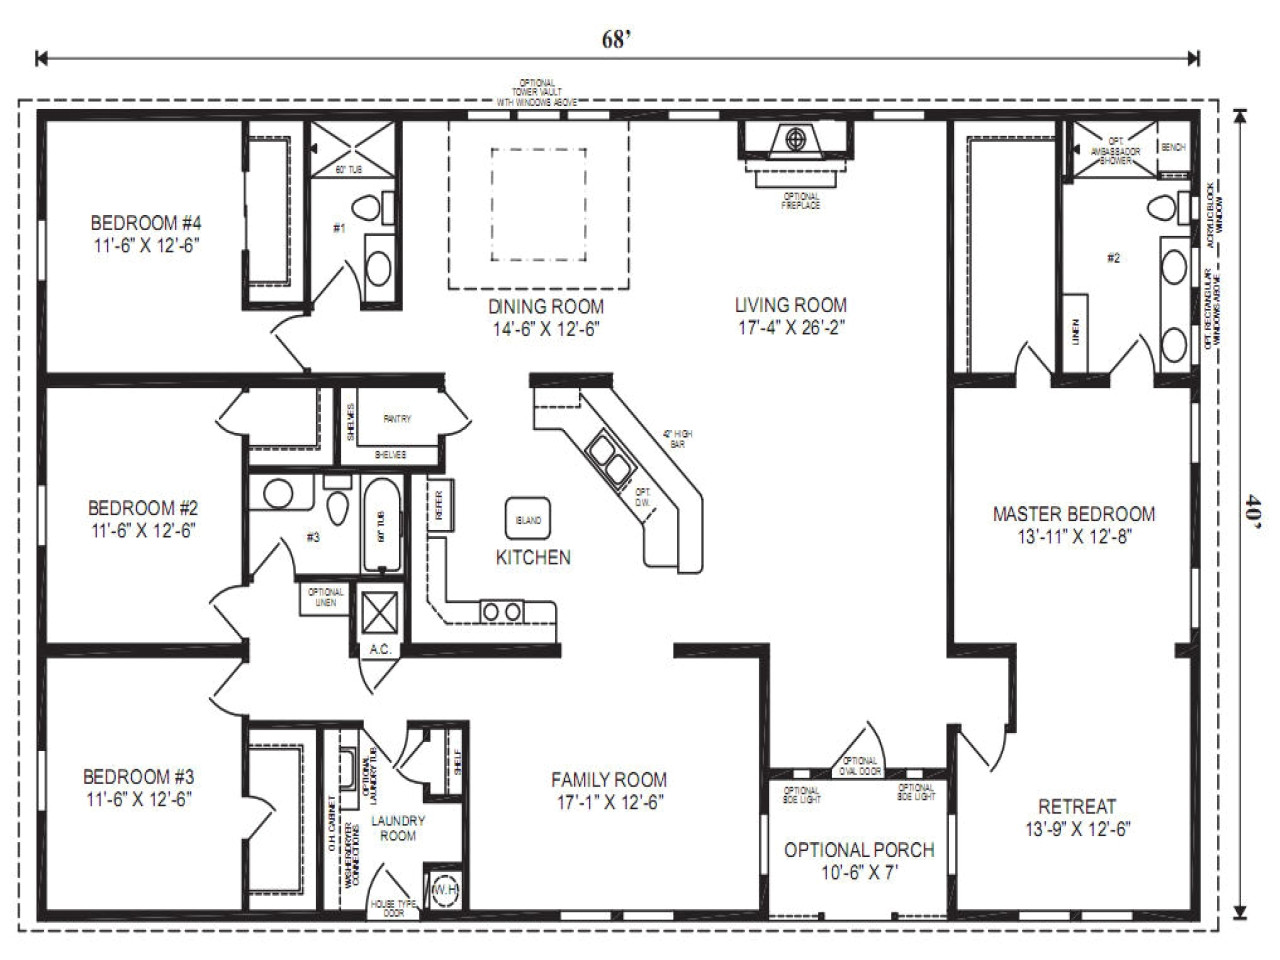 Large Modular Home Floor Plans Double Wide Mobile Homes Mobile Modular Home Floor Plans